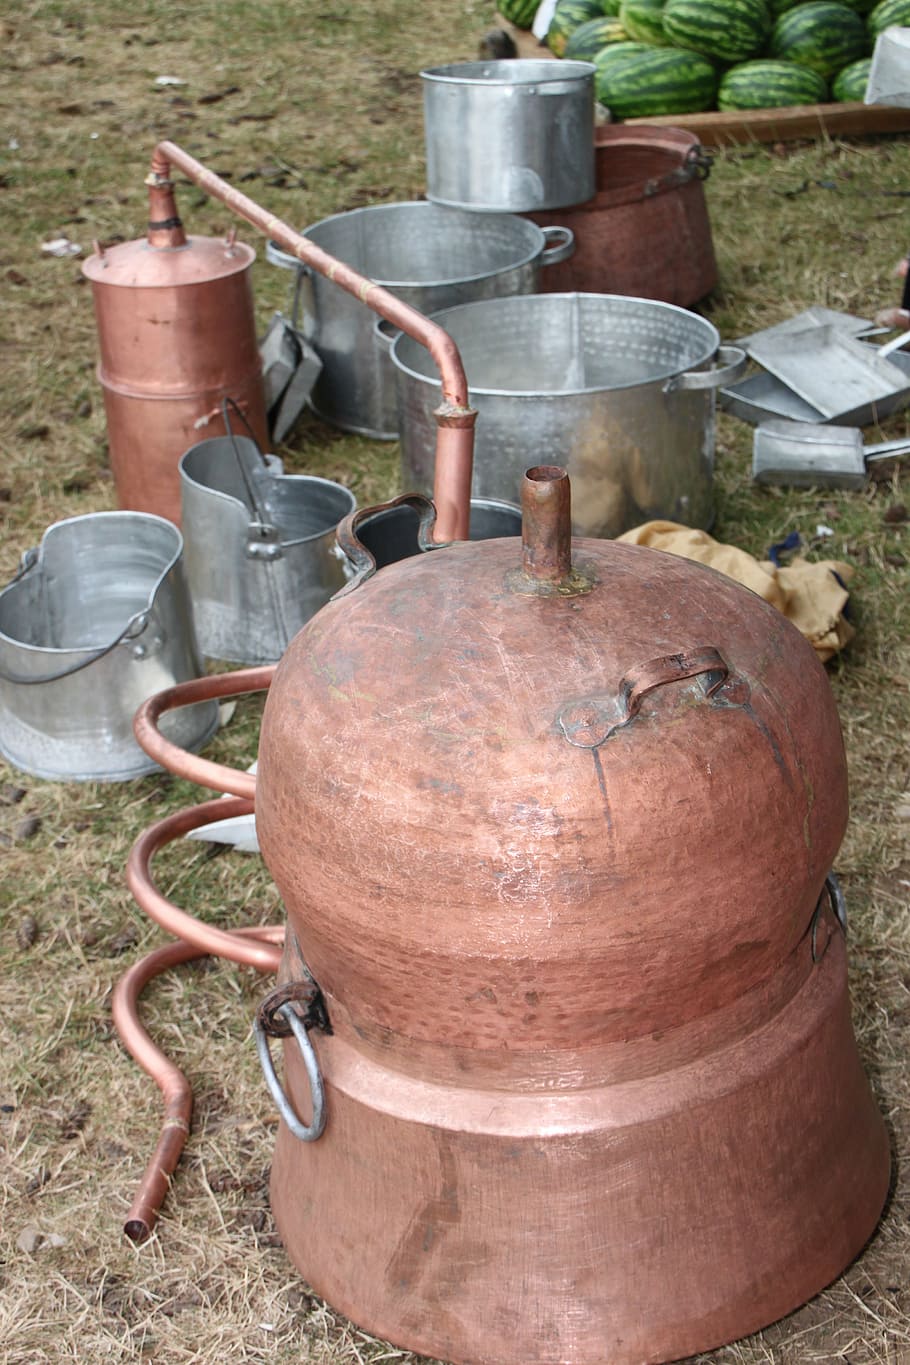 alcohol, boiler, brandy, copper, distilling, handmade, objects, tools, metal, day